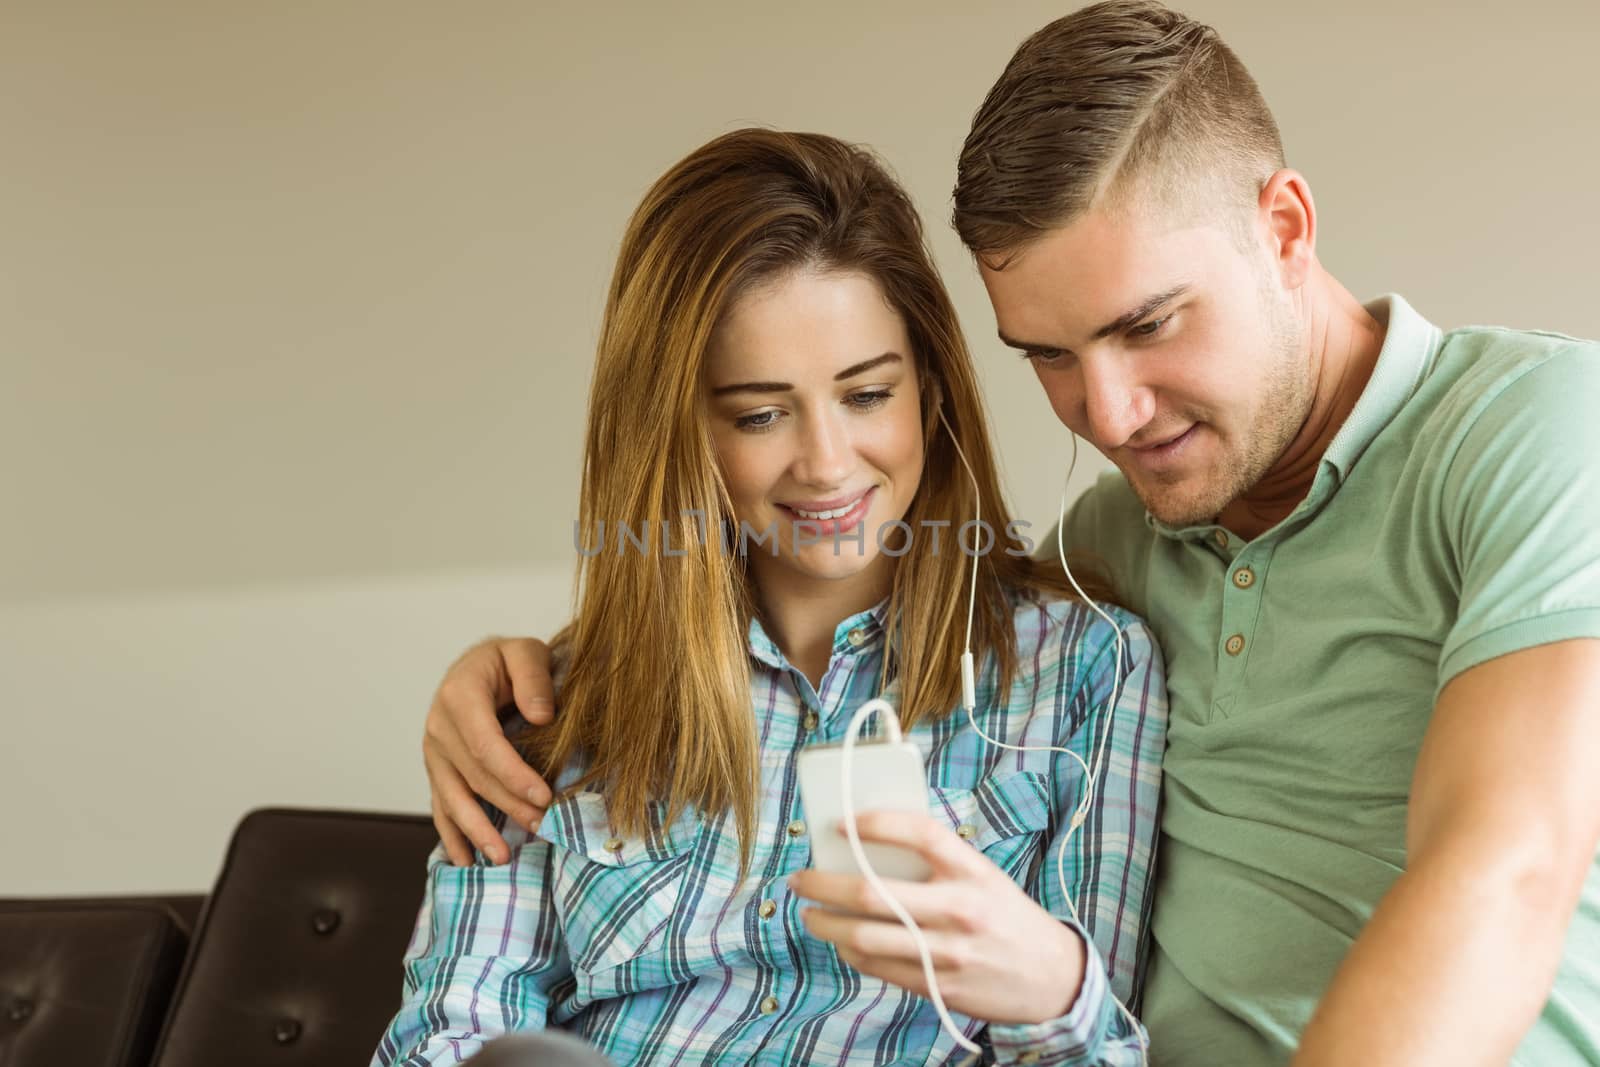 Cute couple relaxing on couch with smartphone by Wavebreakmedia